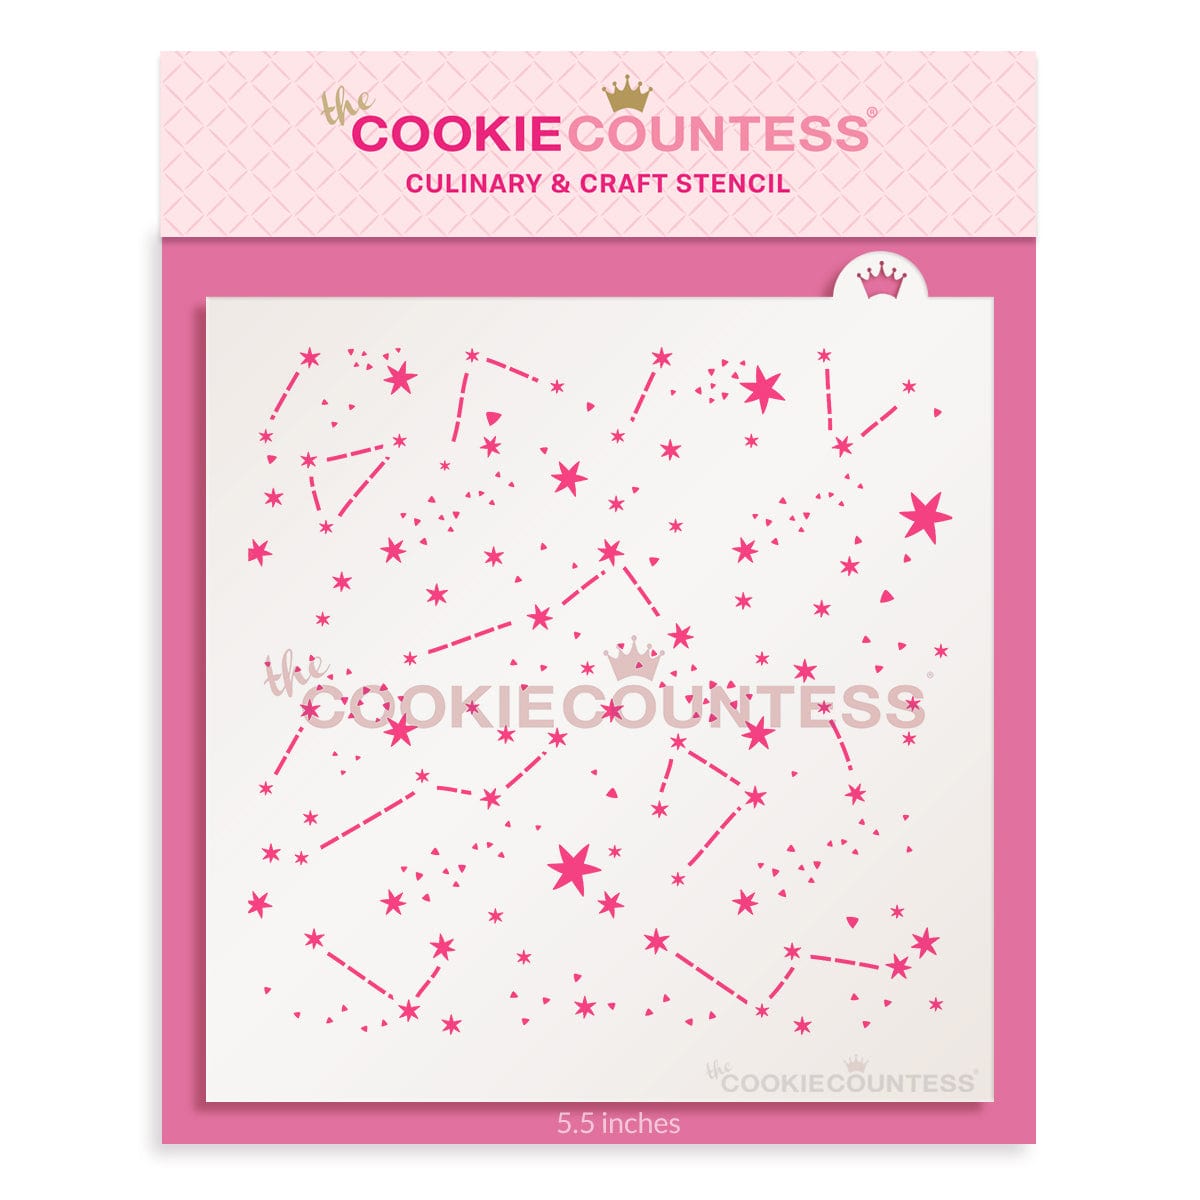 Astro Outer Space, Cookie Cutters, Fondant Cutters